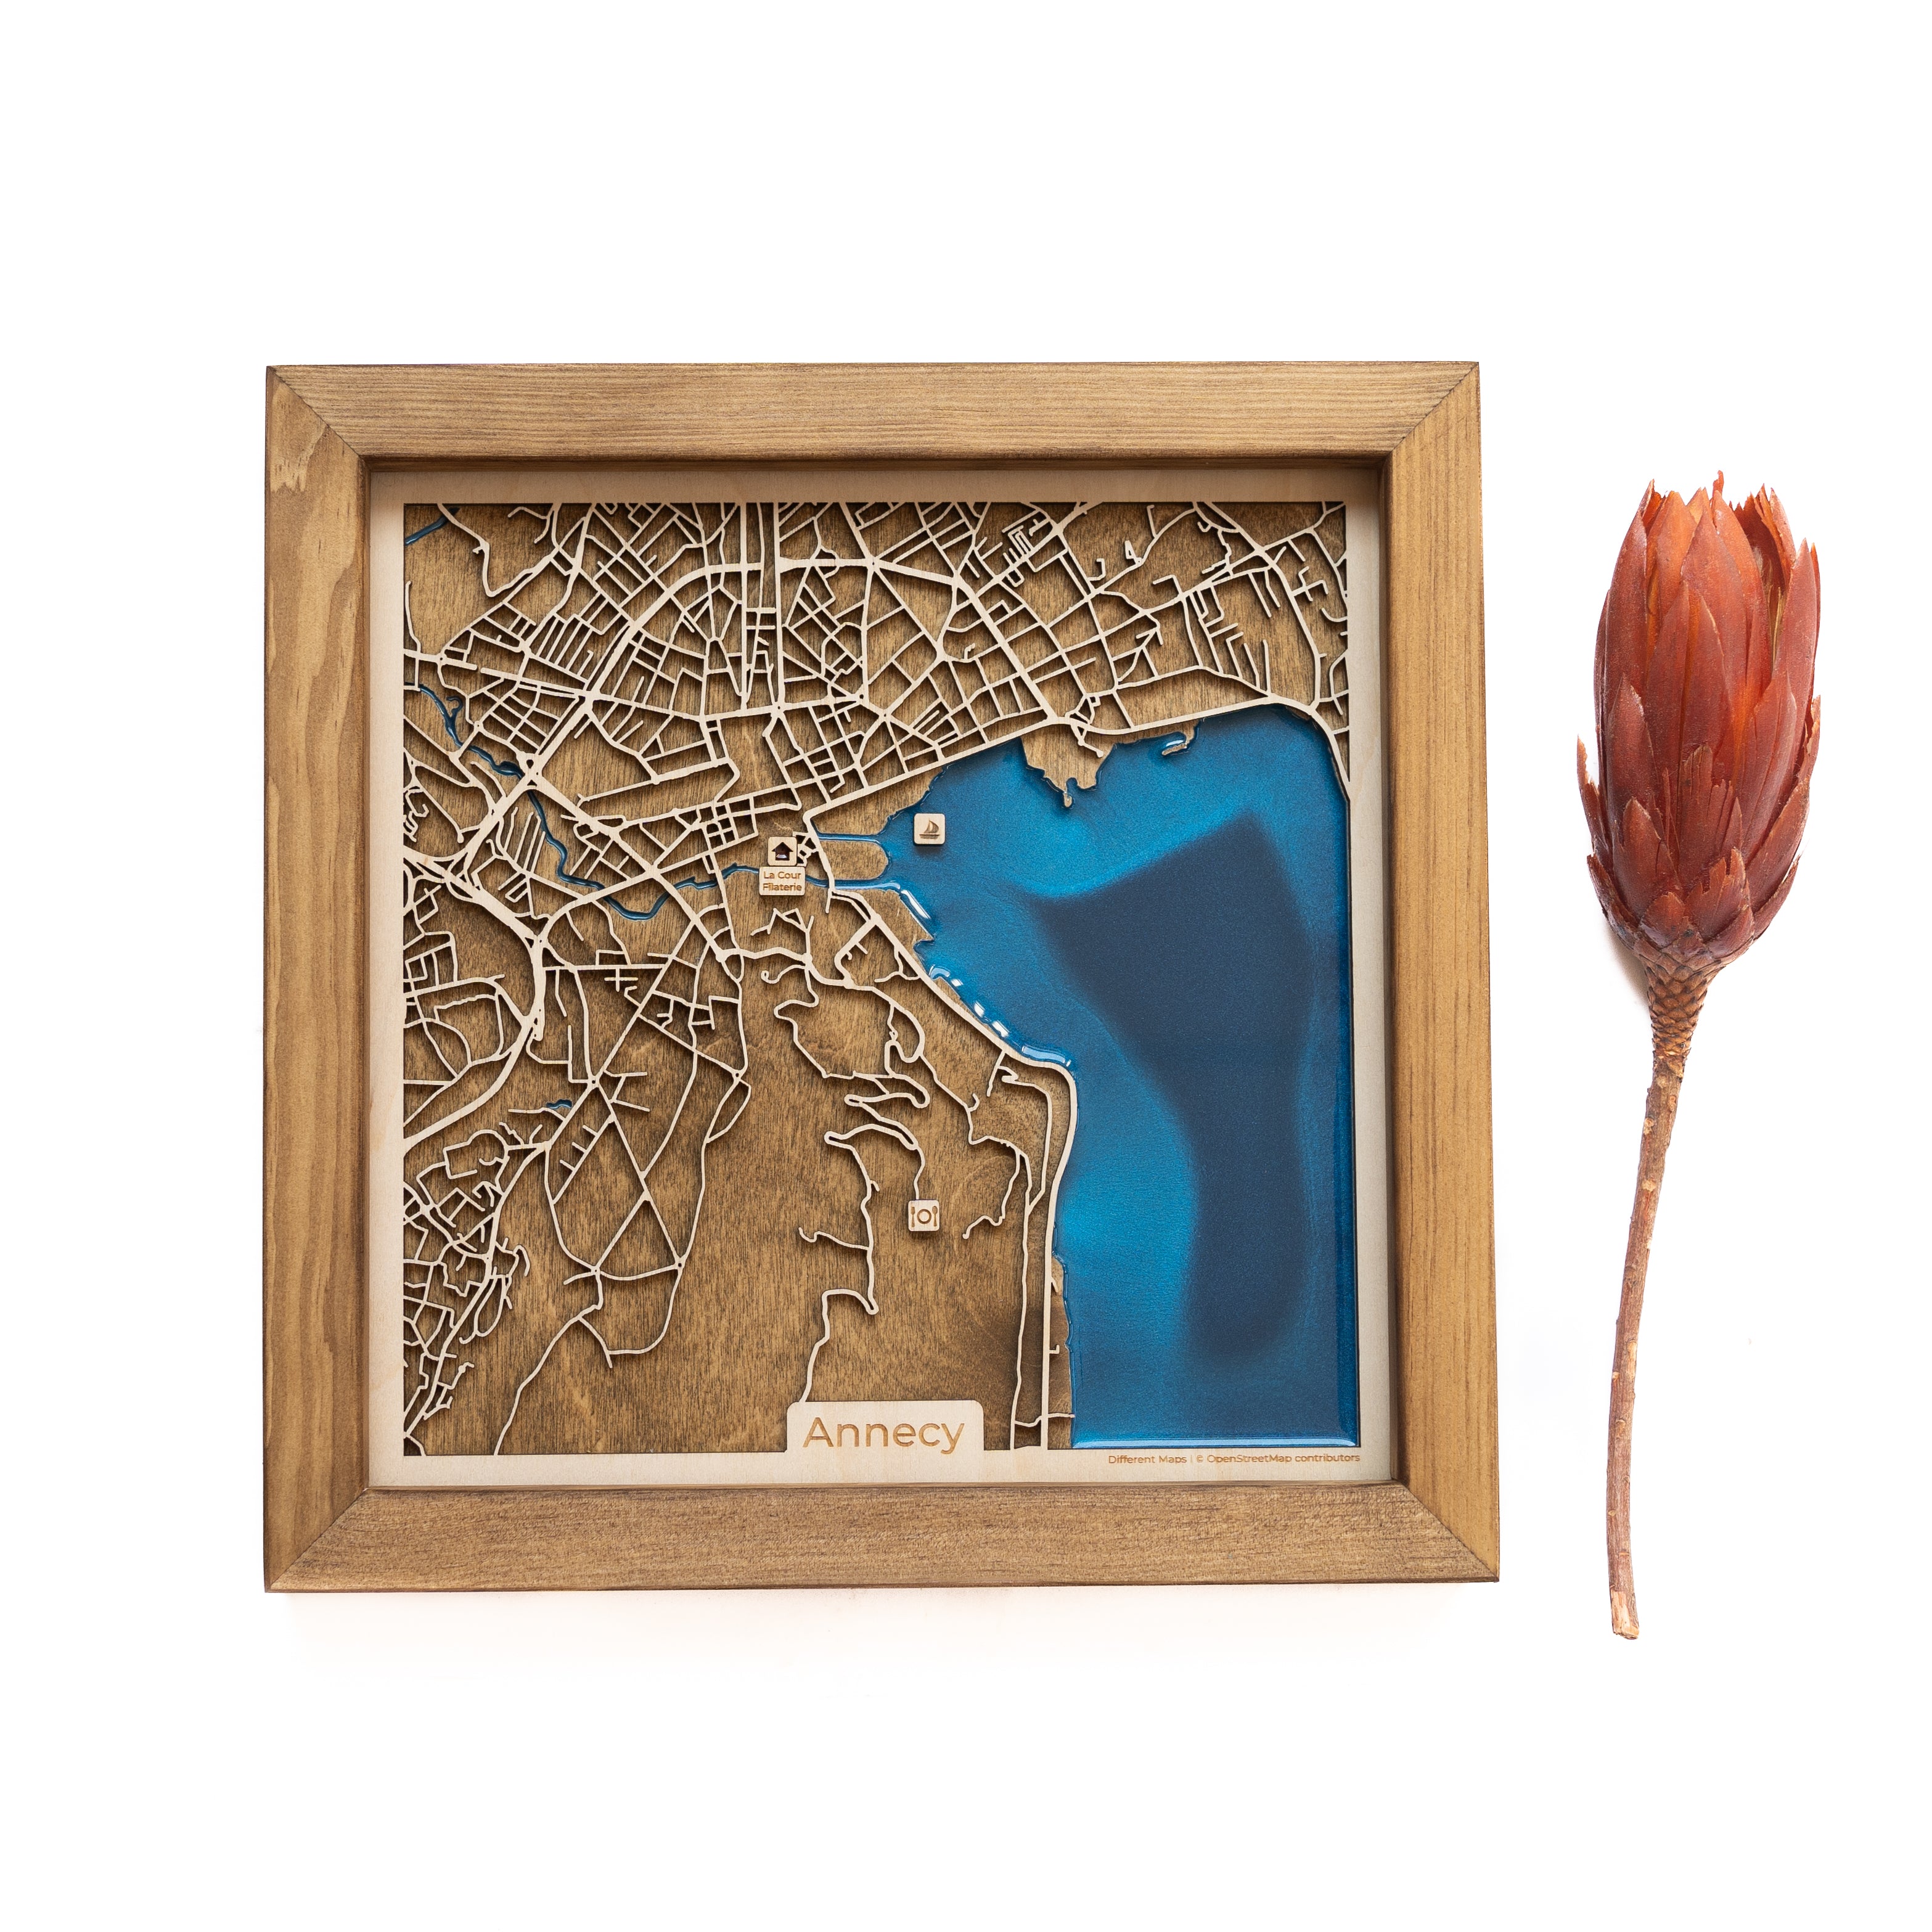 Capture the essence of Annecy with our custom wooden map. Crafted with precision, this unique piece intricately showcases the beauty of this charming French town.